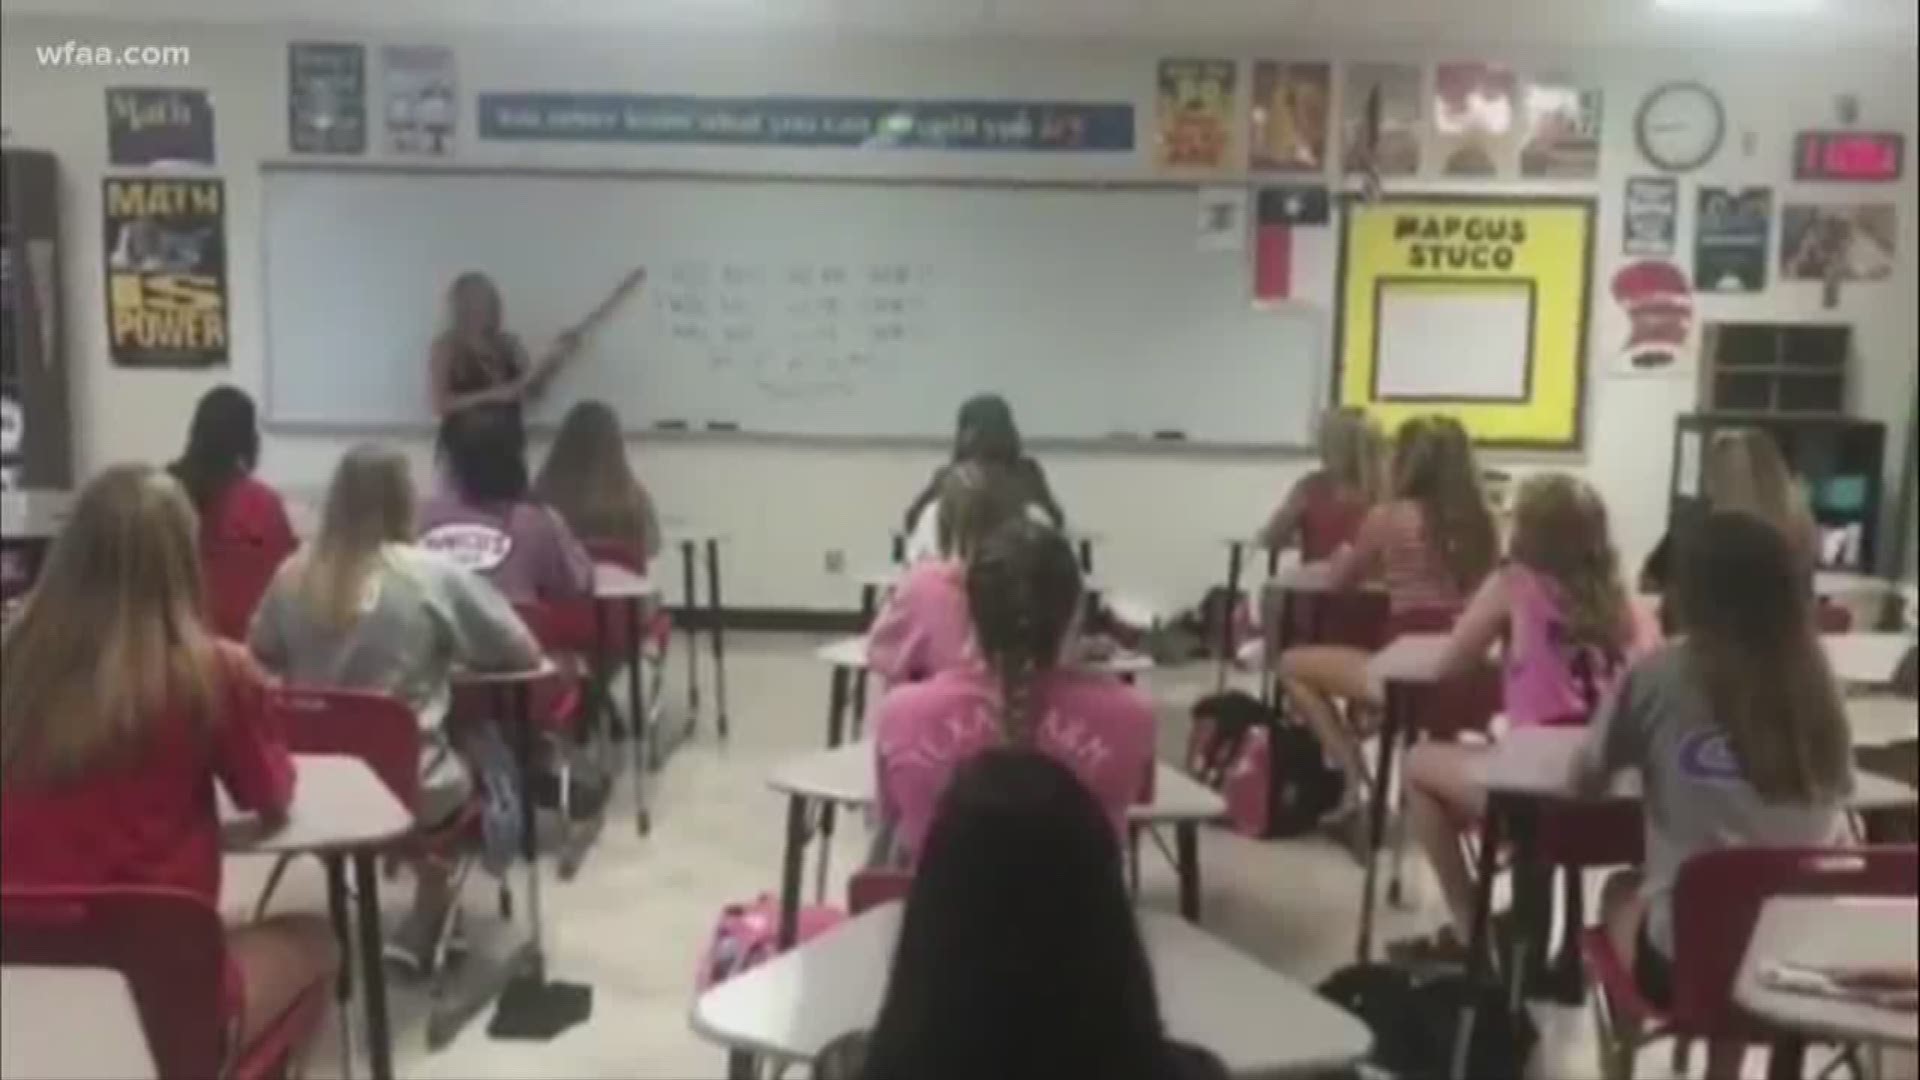 Dress code video sparks controversy